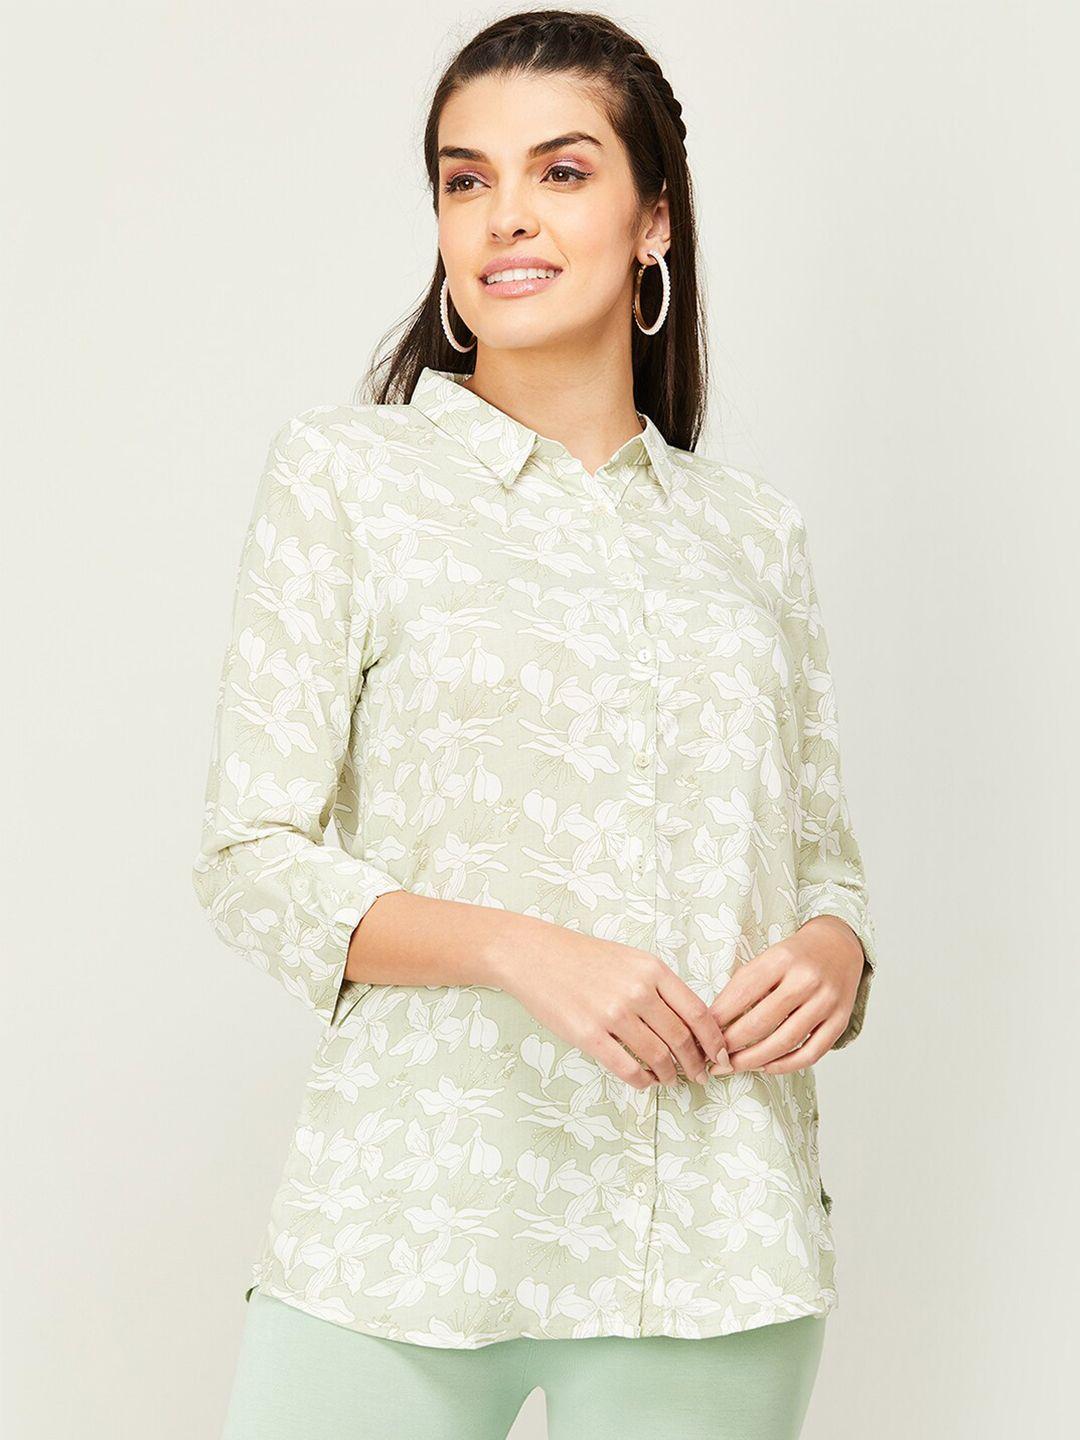 melange by lifestyle floral printed shirt style top